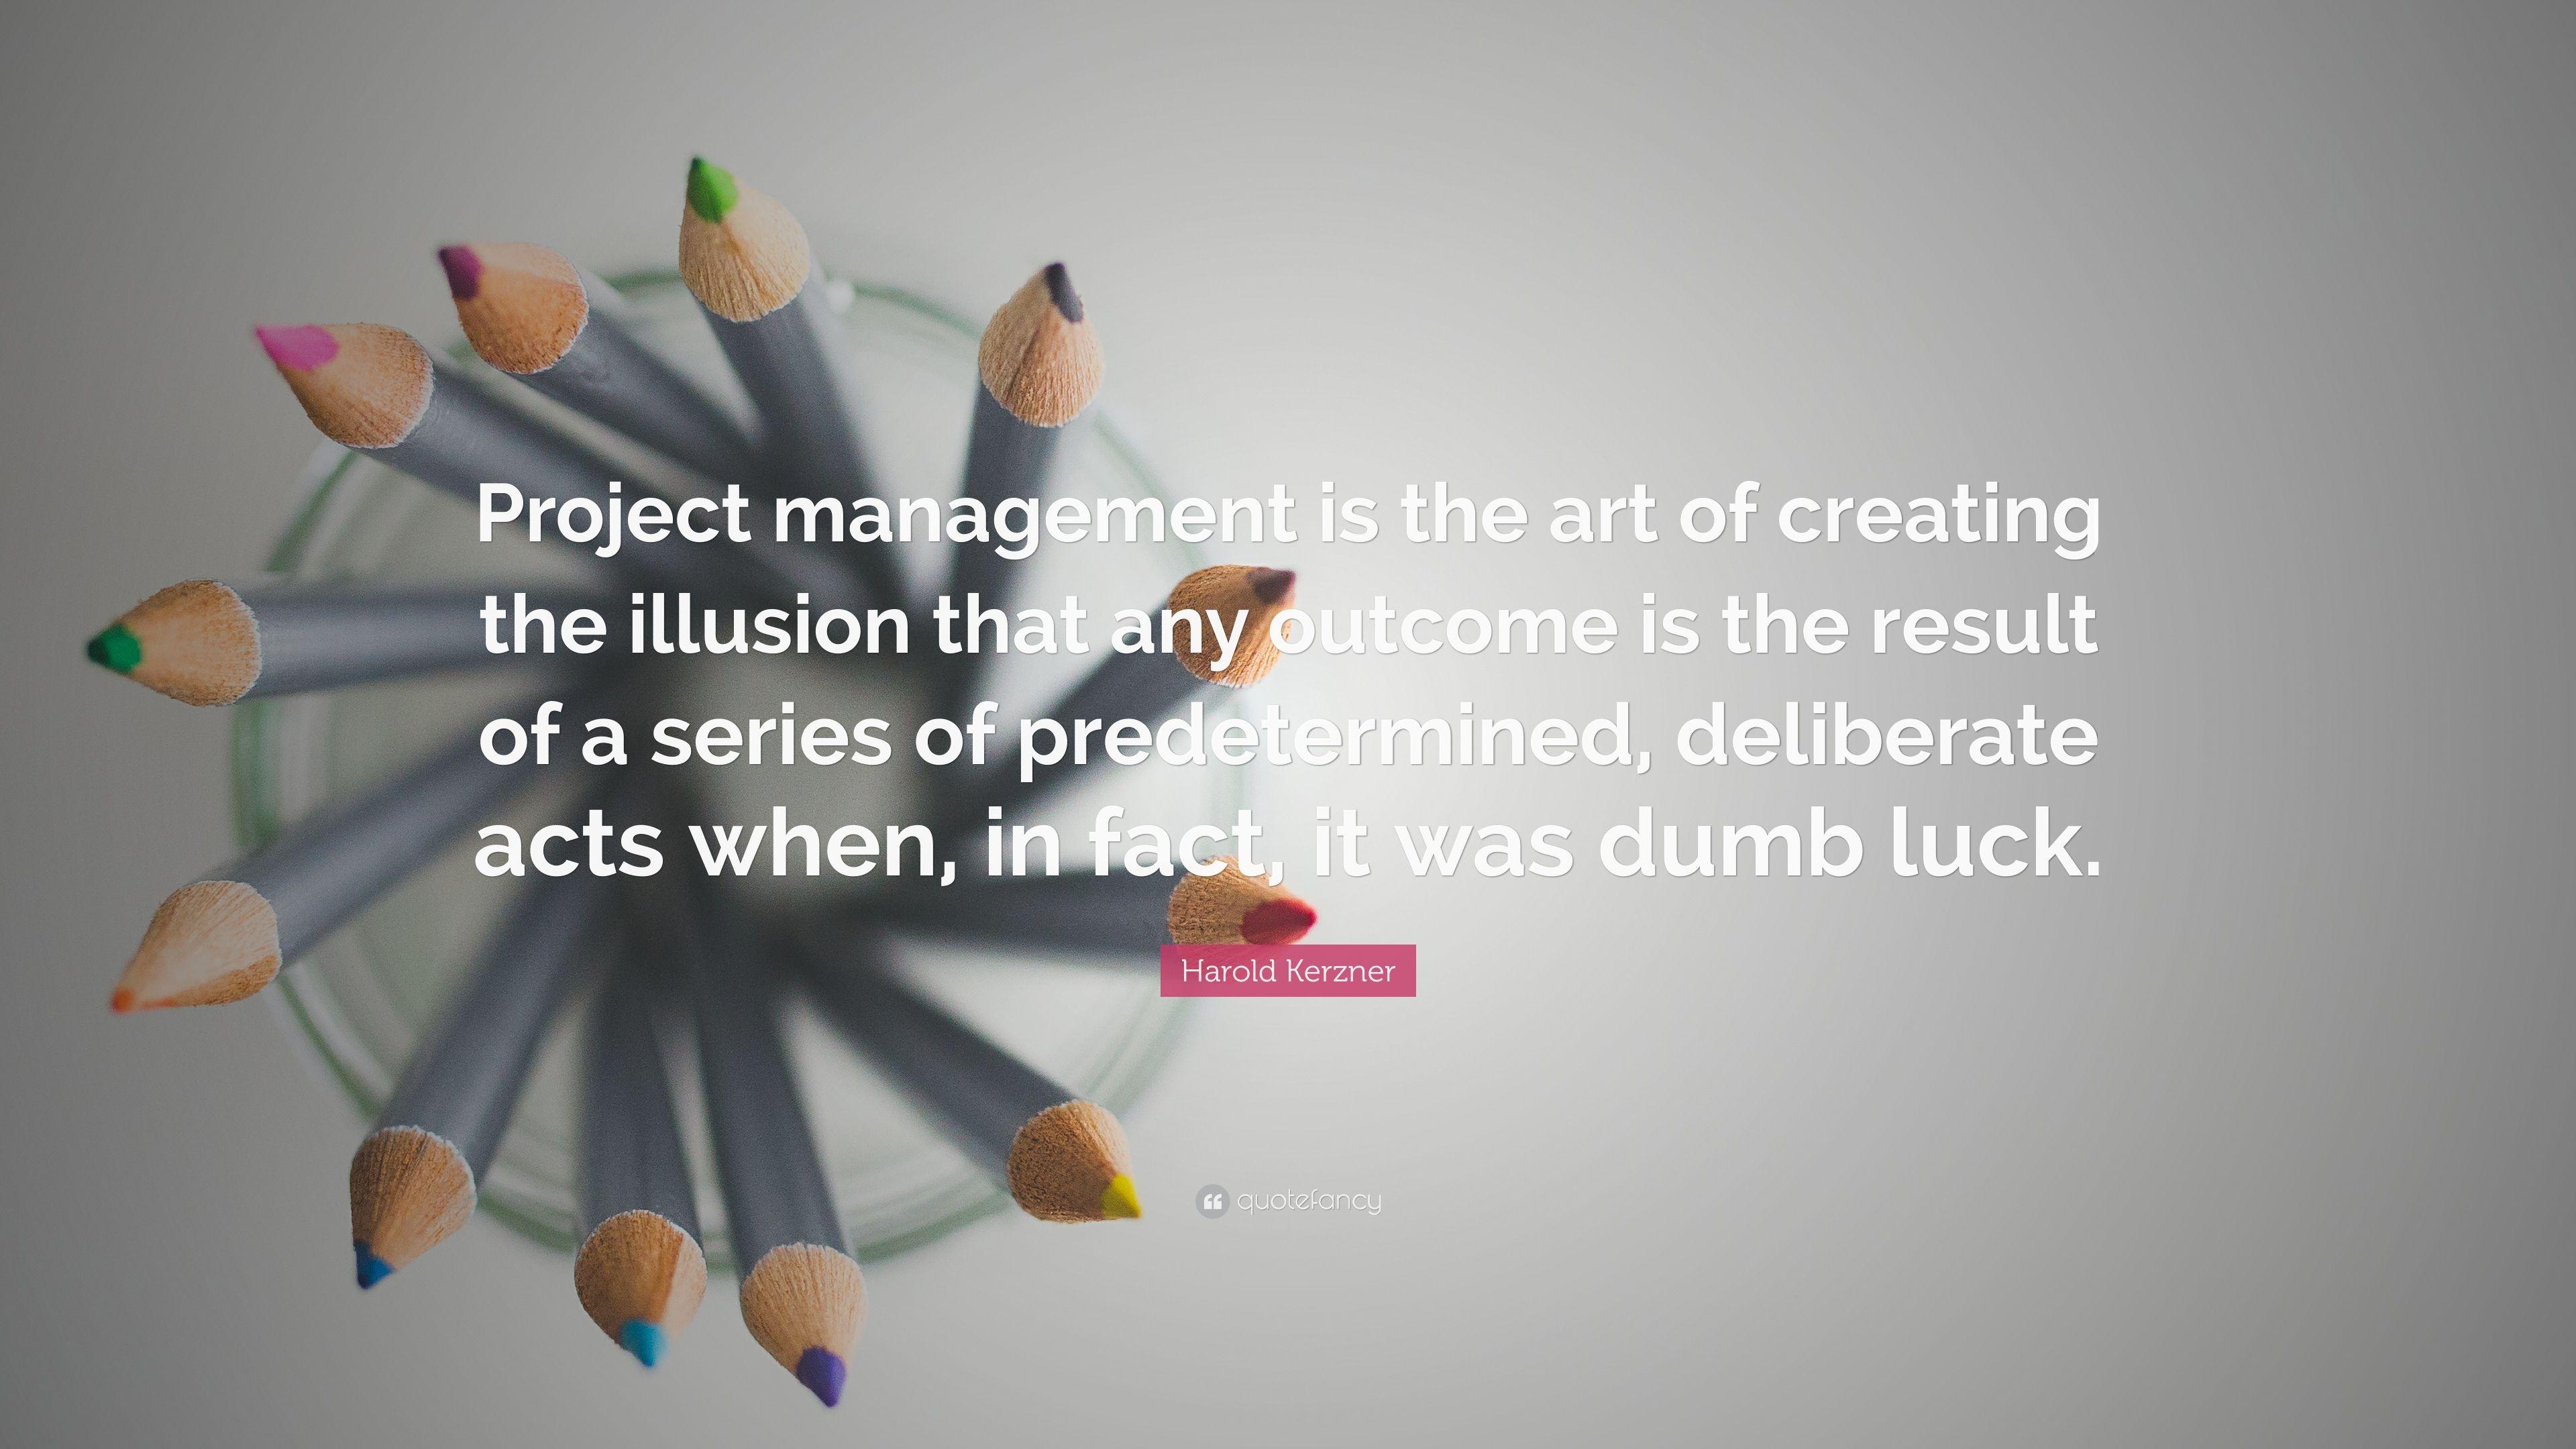 Harold Kerzner Quote: “Project management is the art of creating